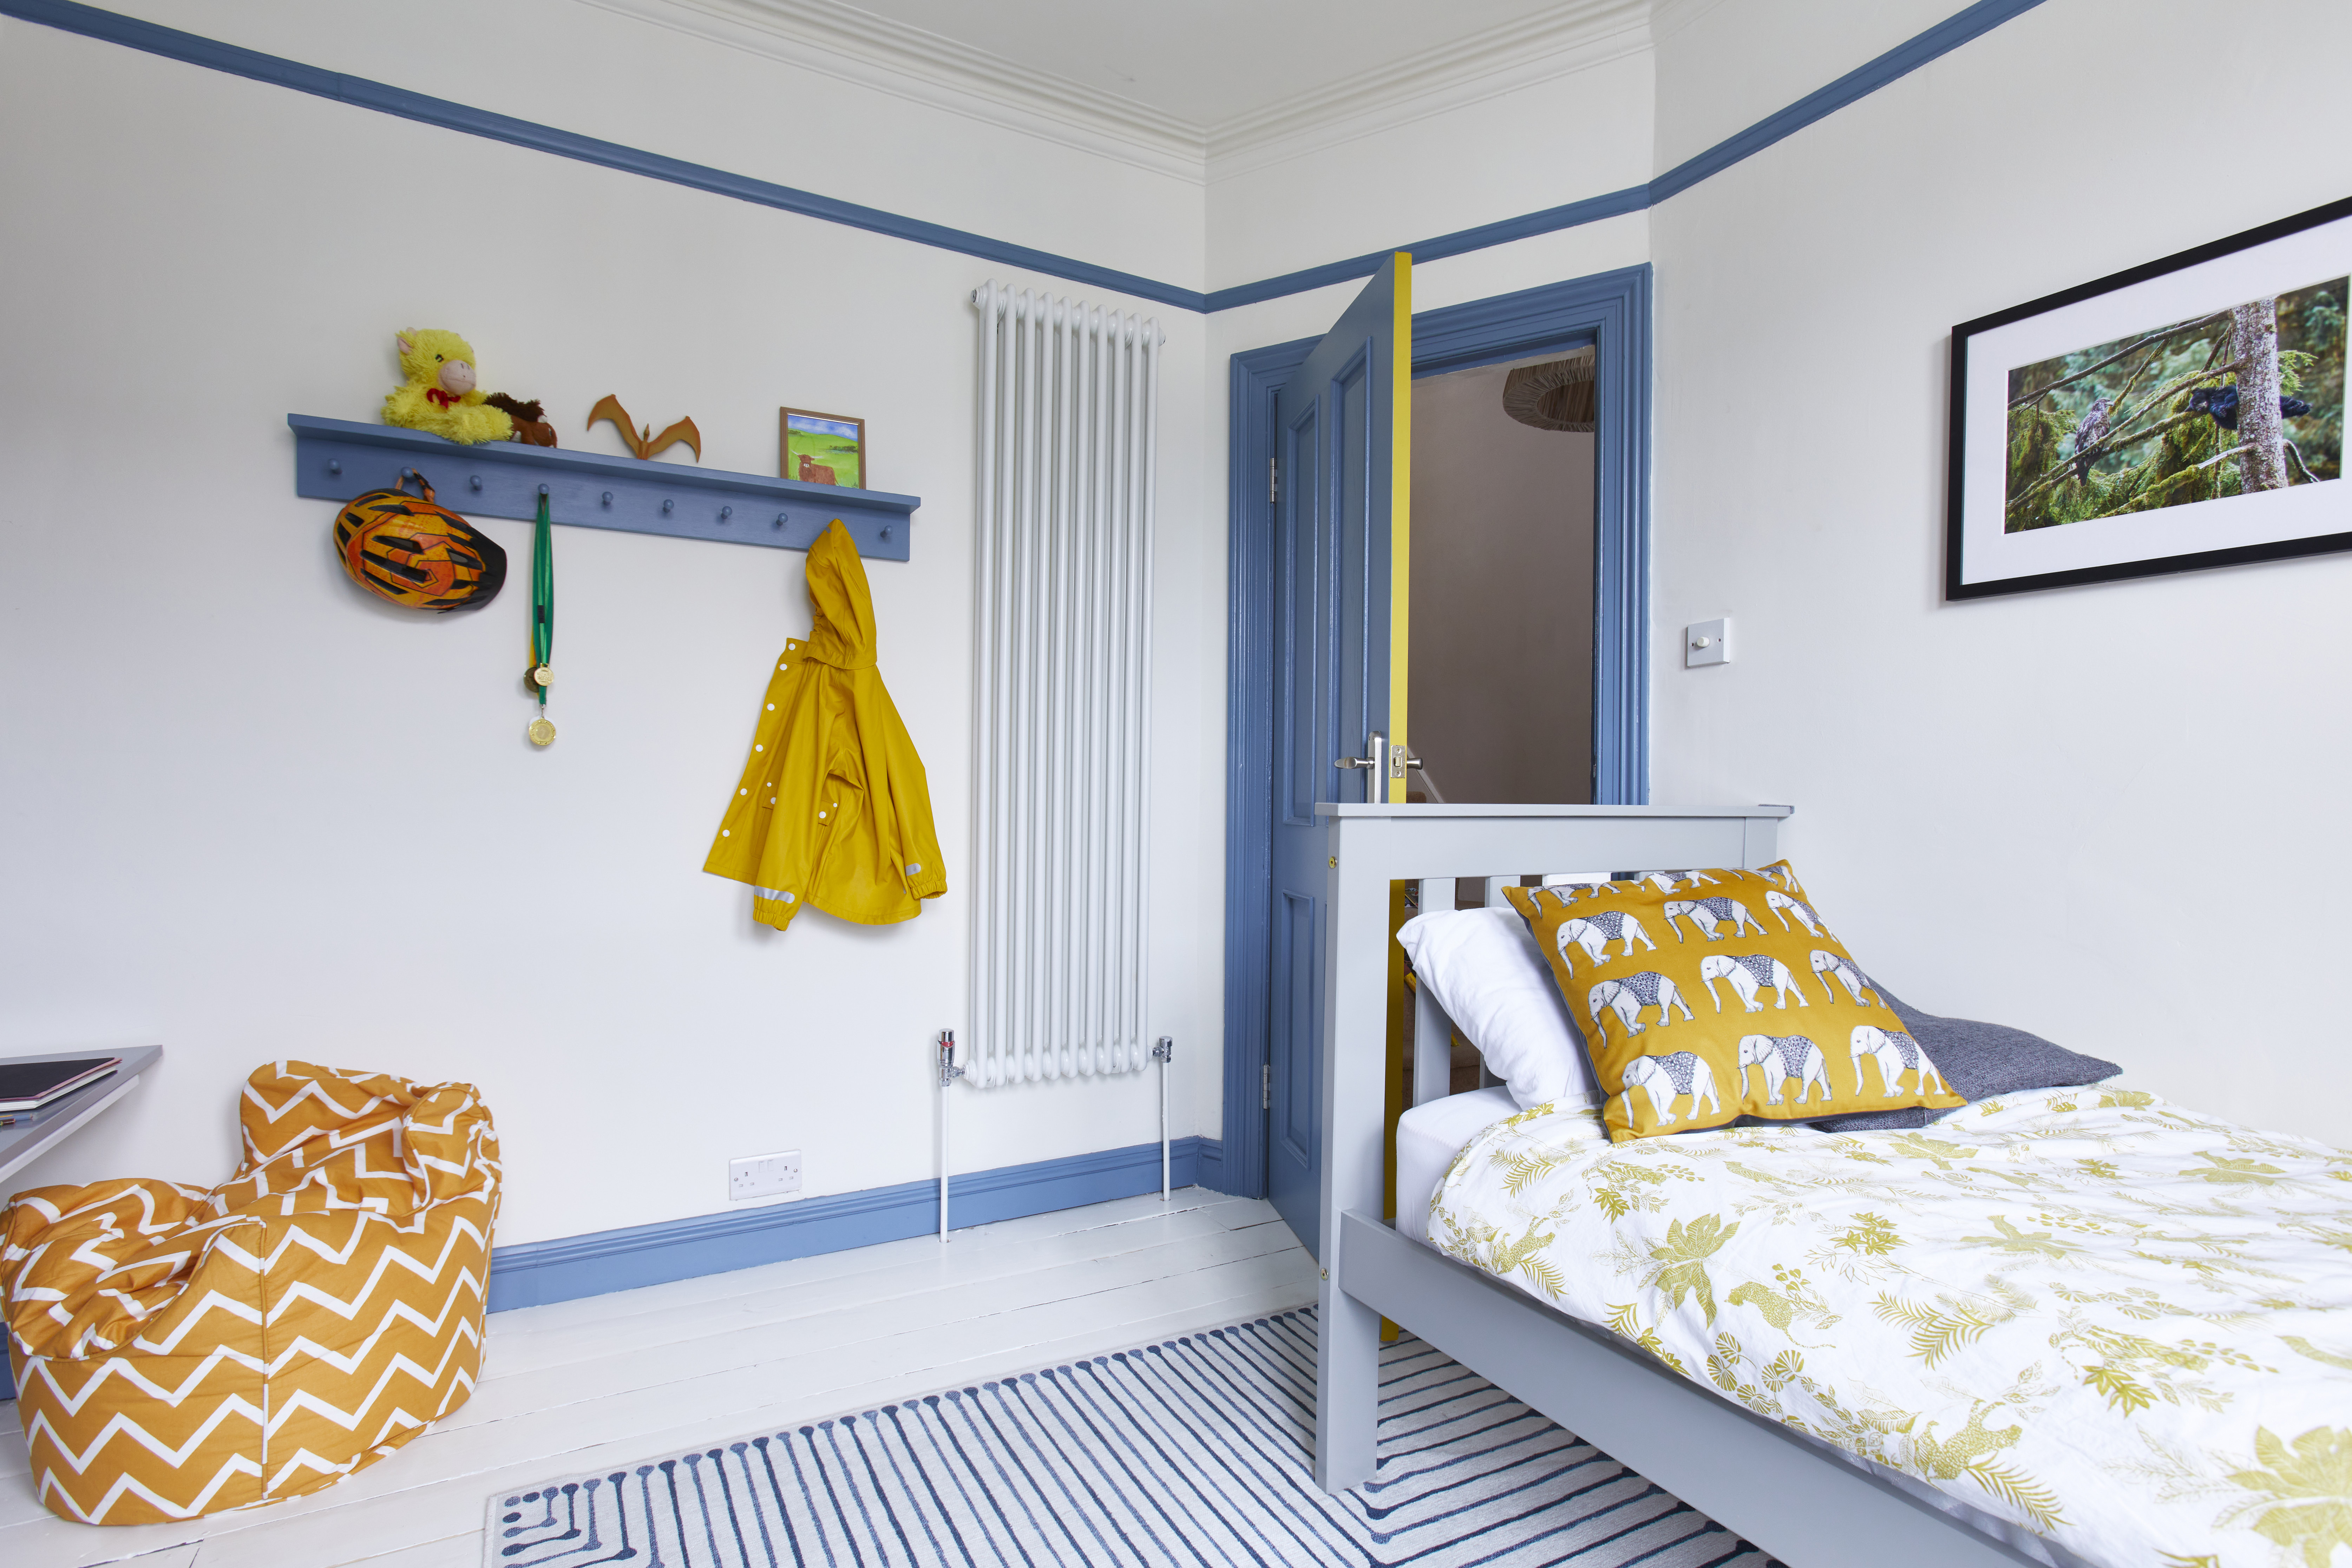 Yellow and blue bedroom